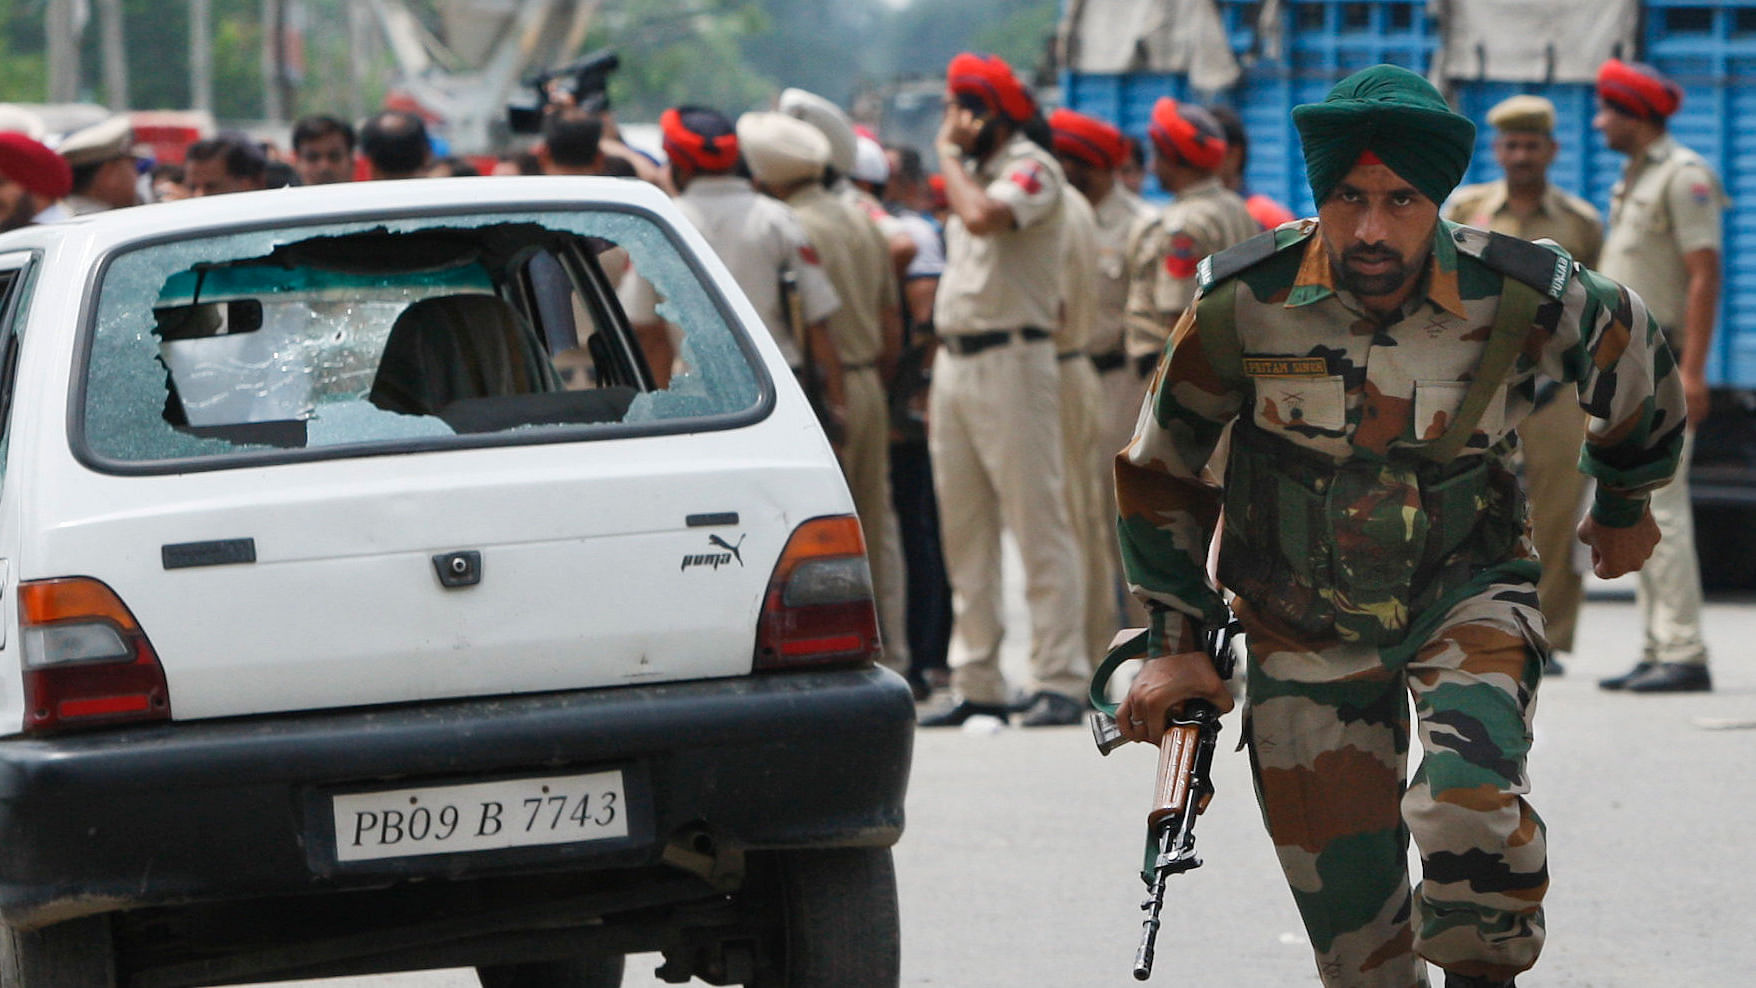 Security personnel at Dinanagar area where the terror attack took place. (Photo: AP)